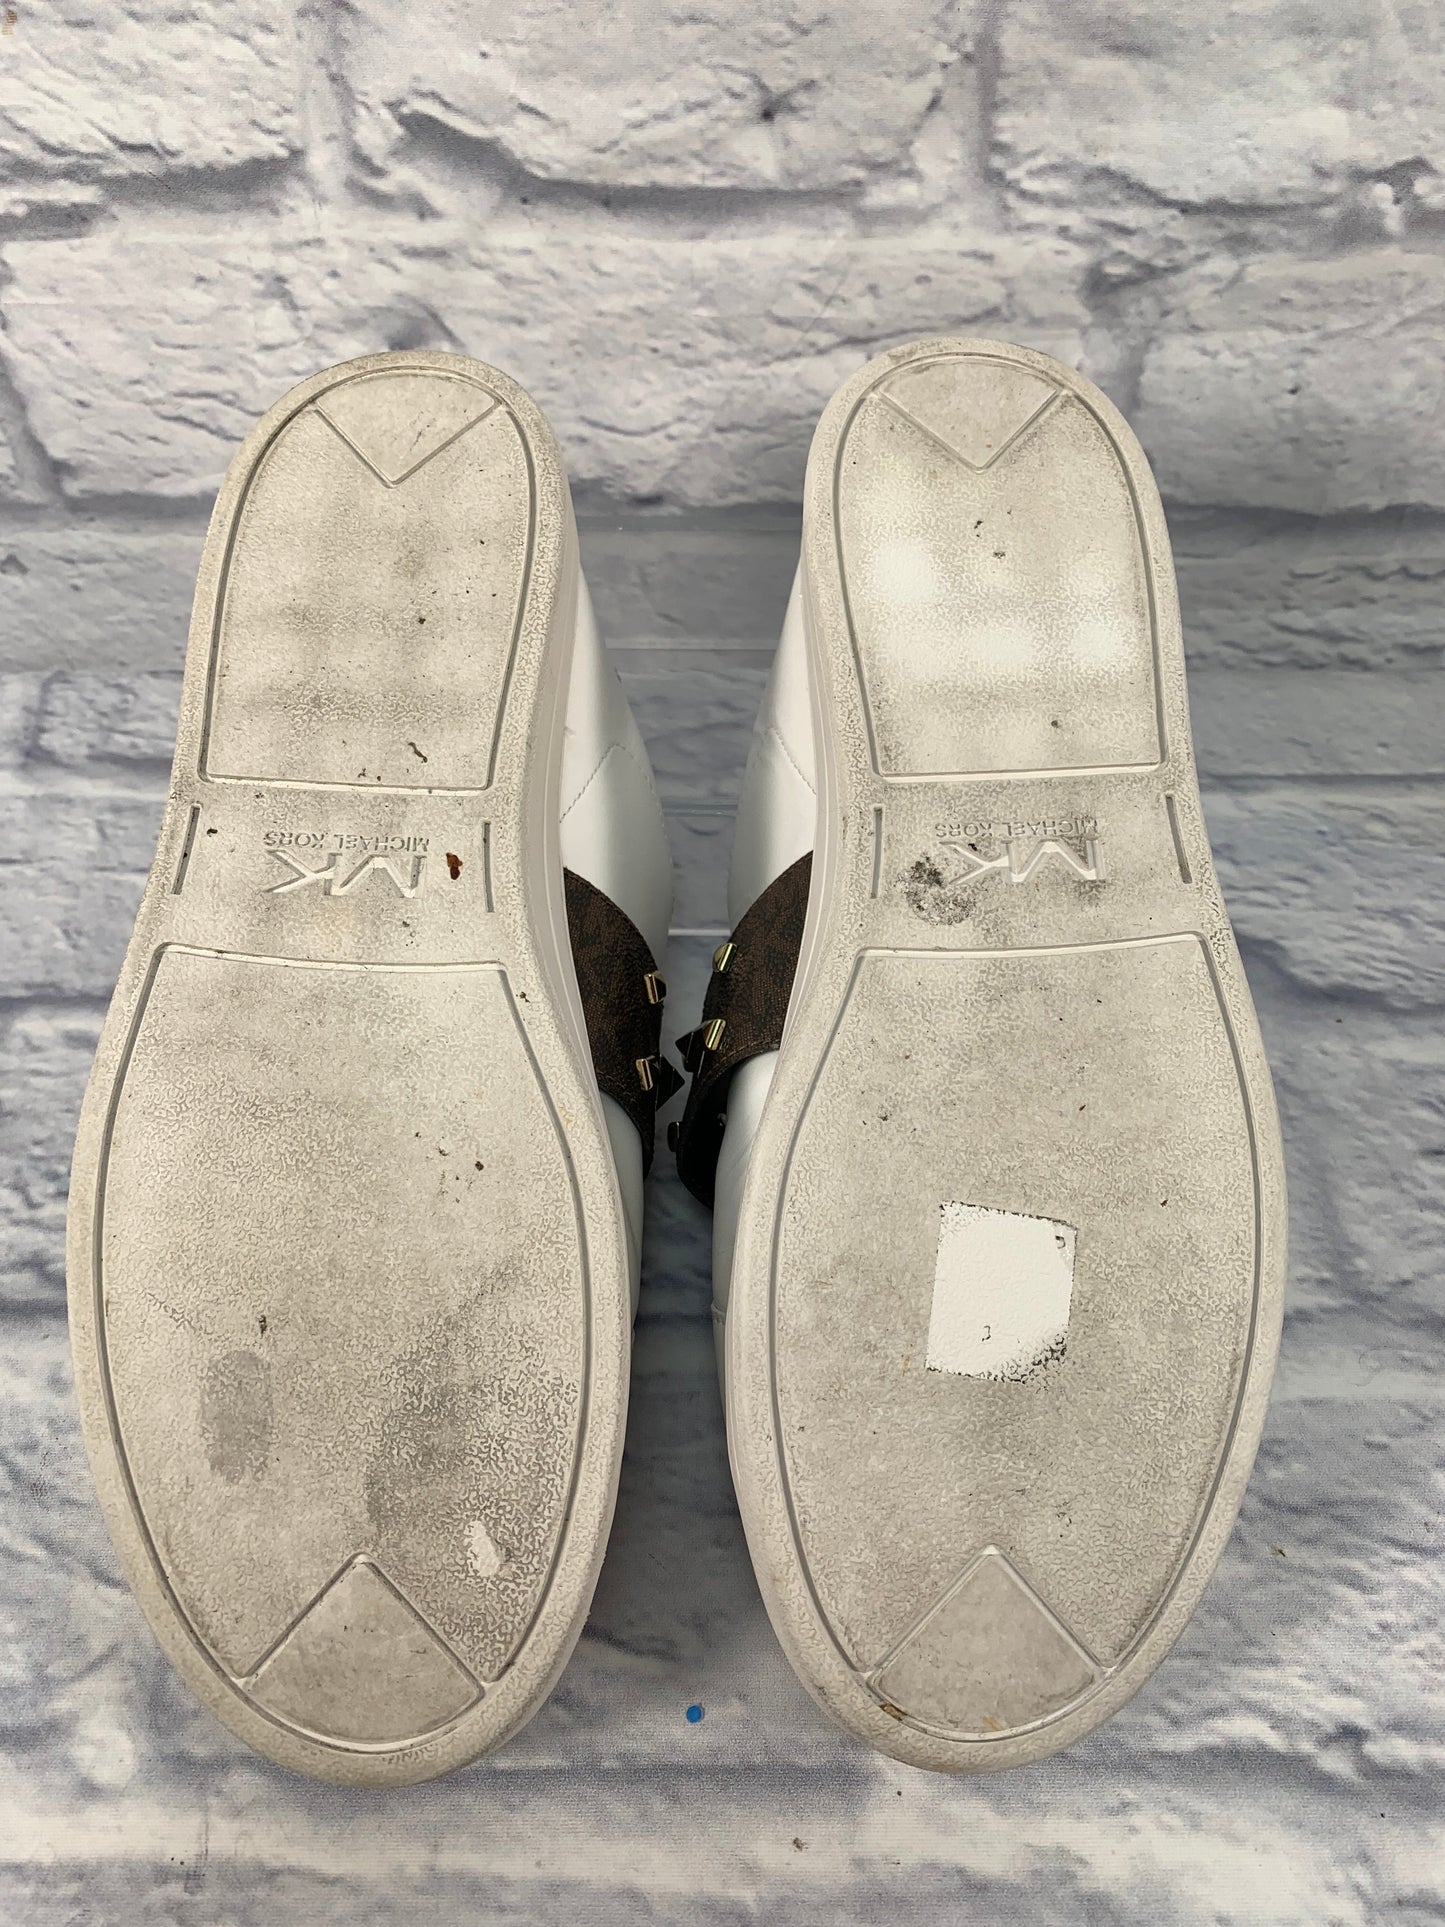 Shoes Sneakers By Michael By Michael Kors  Size: 11